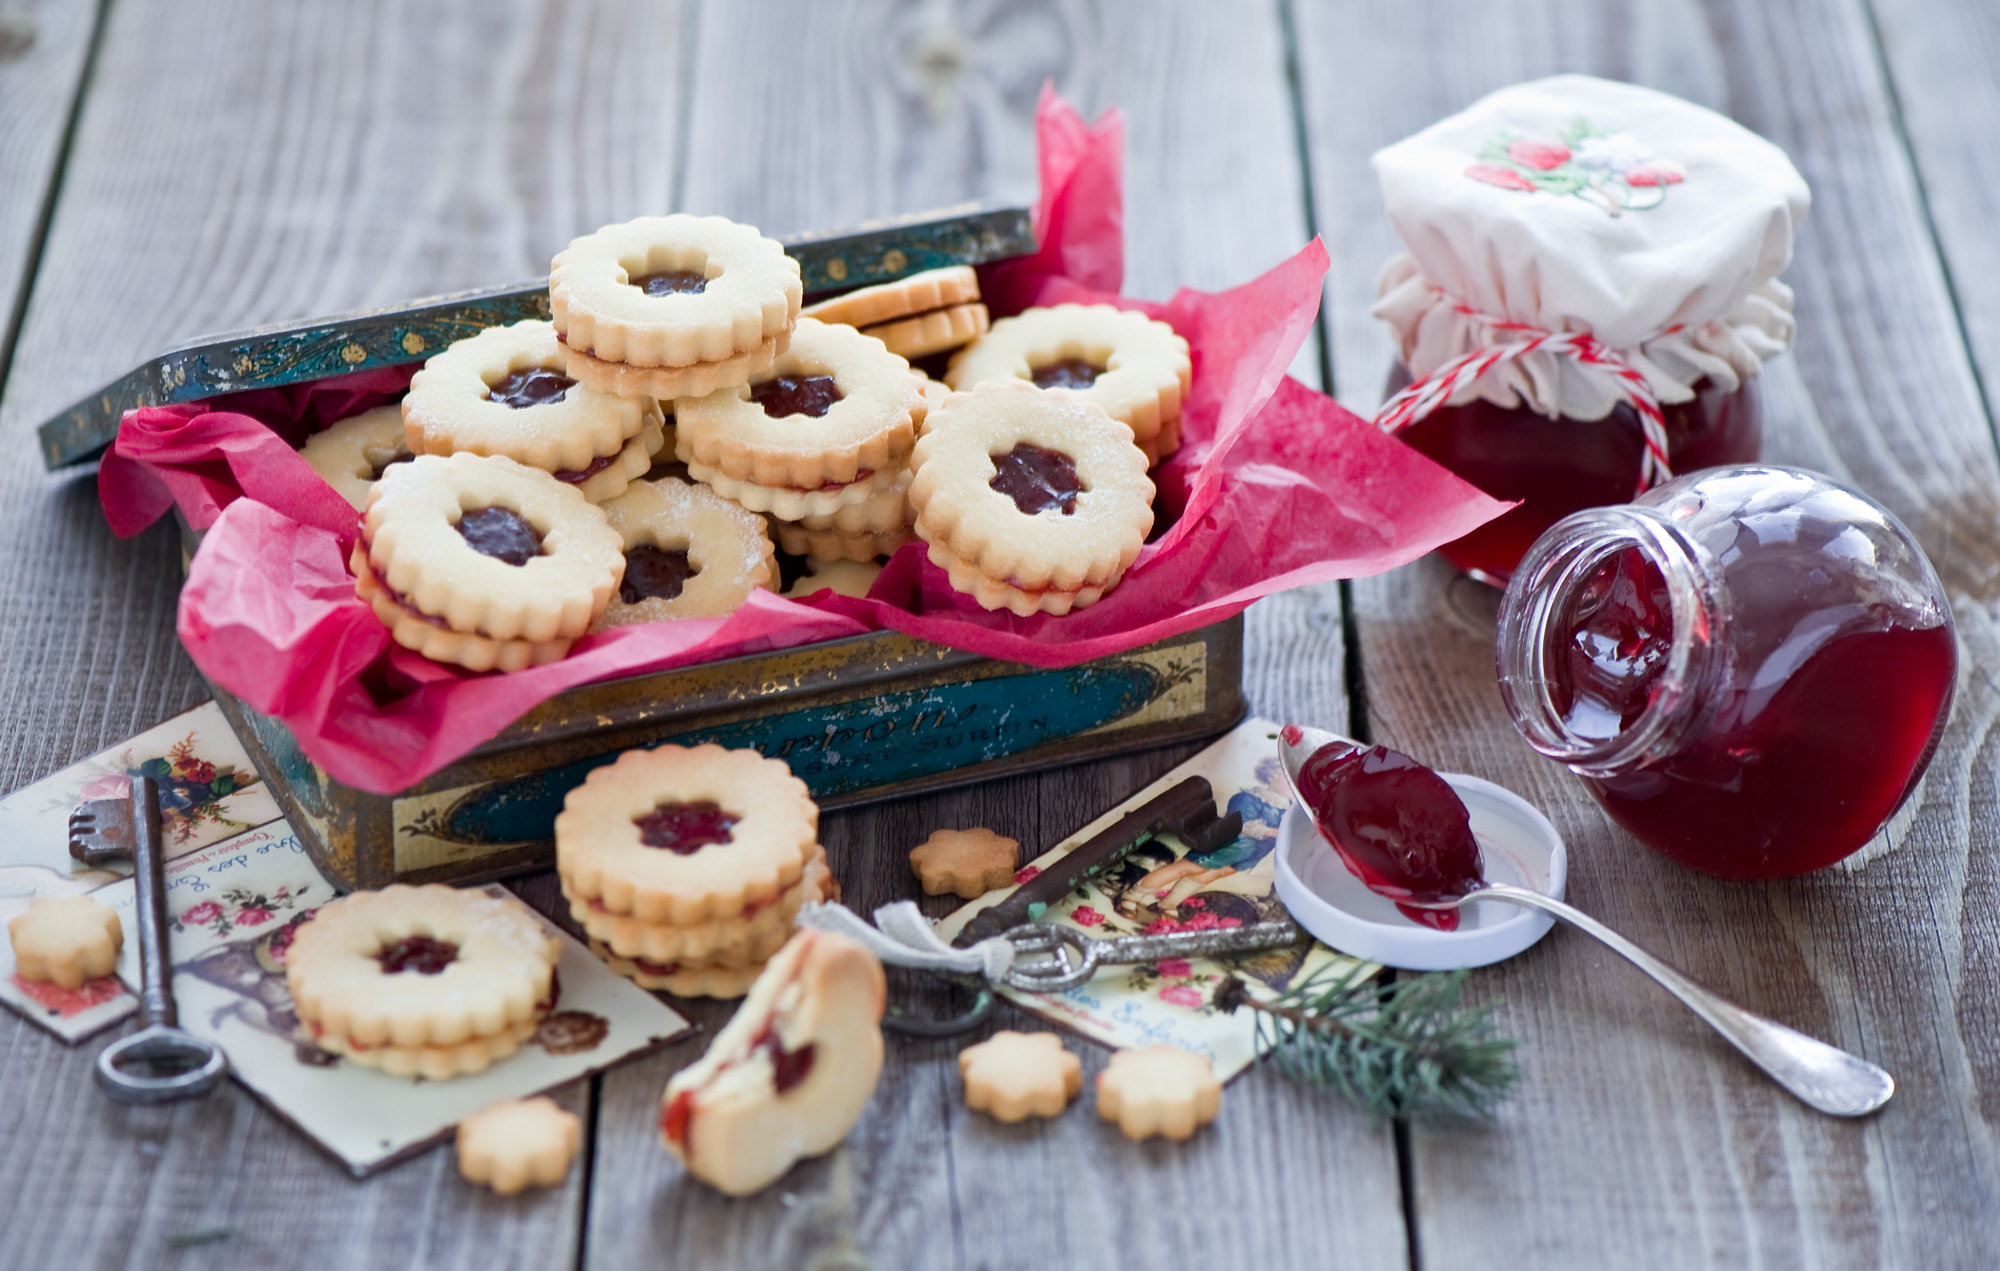 bakery products, sweet, food, cookies, jam, baking images